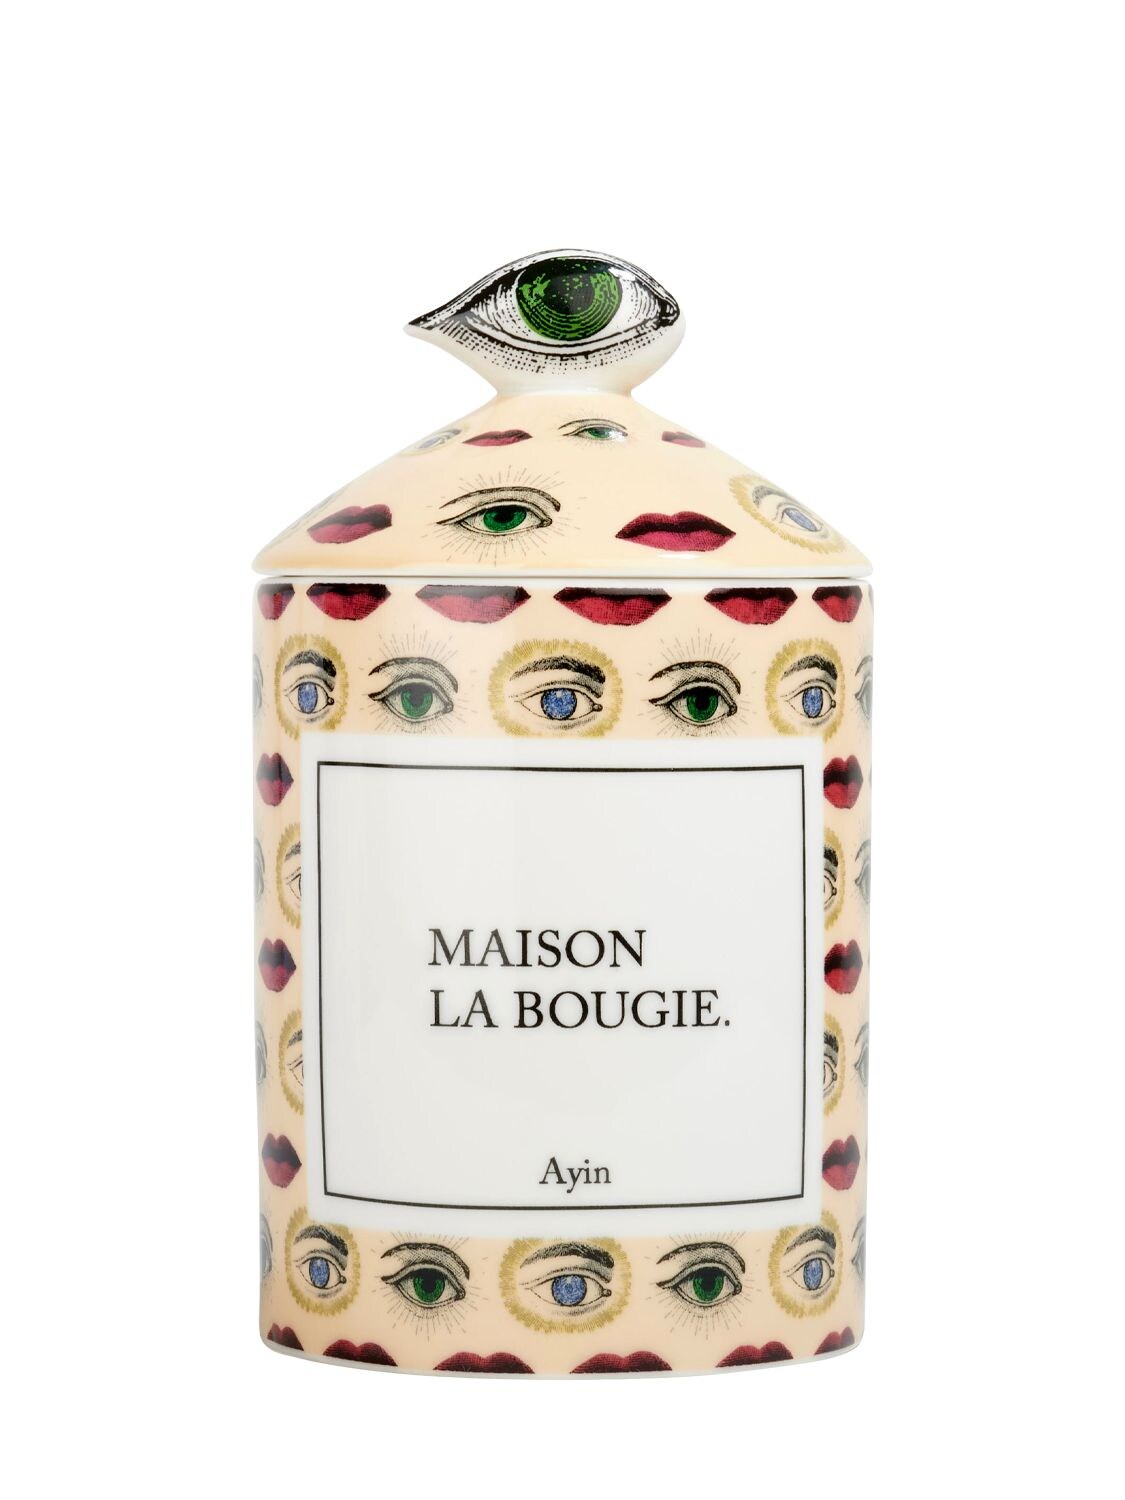 Maison La Bougie 300克ayin Candle香氛蜡烛 In Multicolor